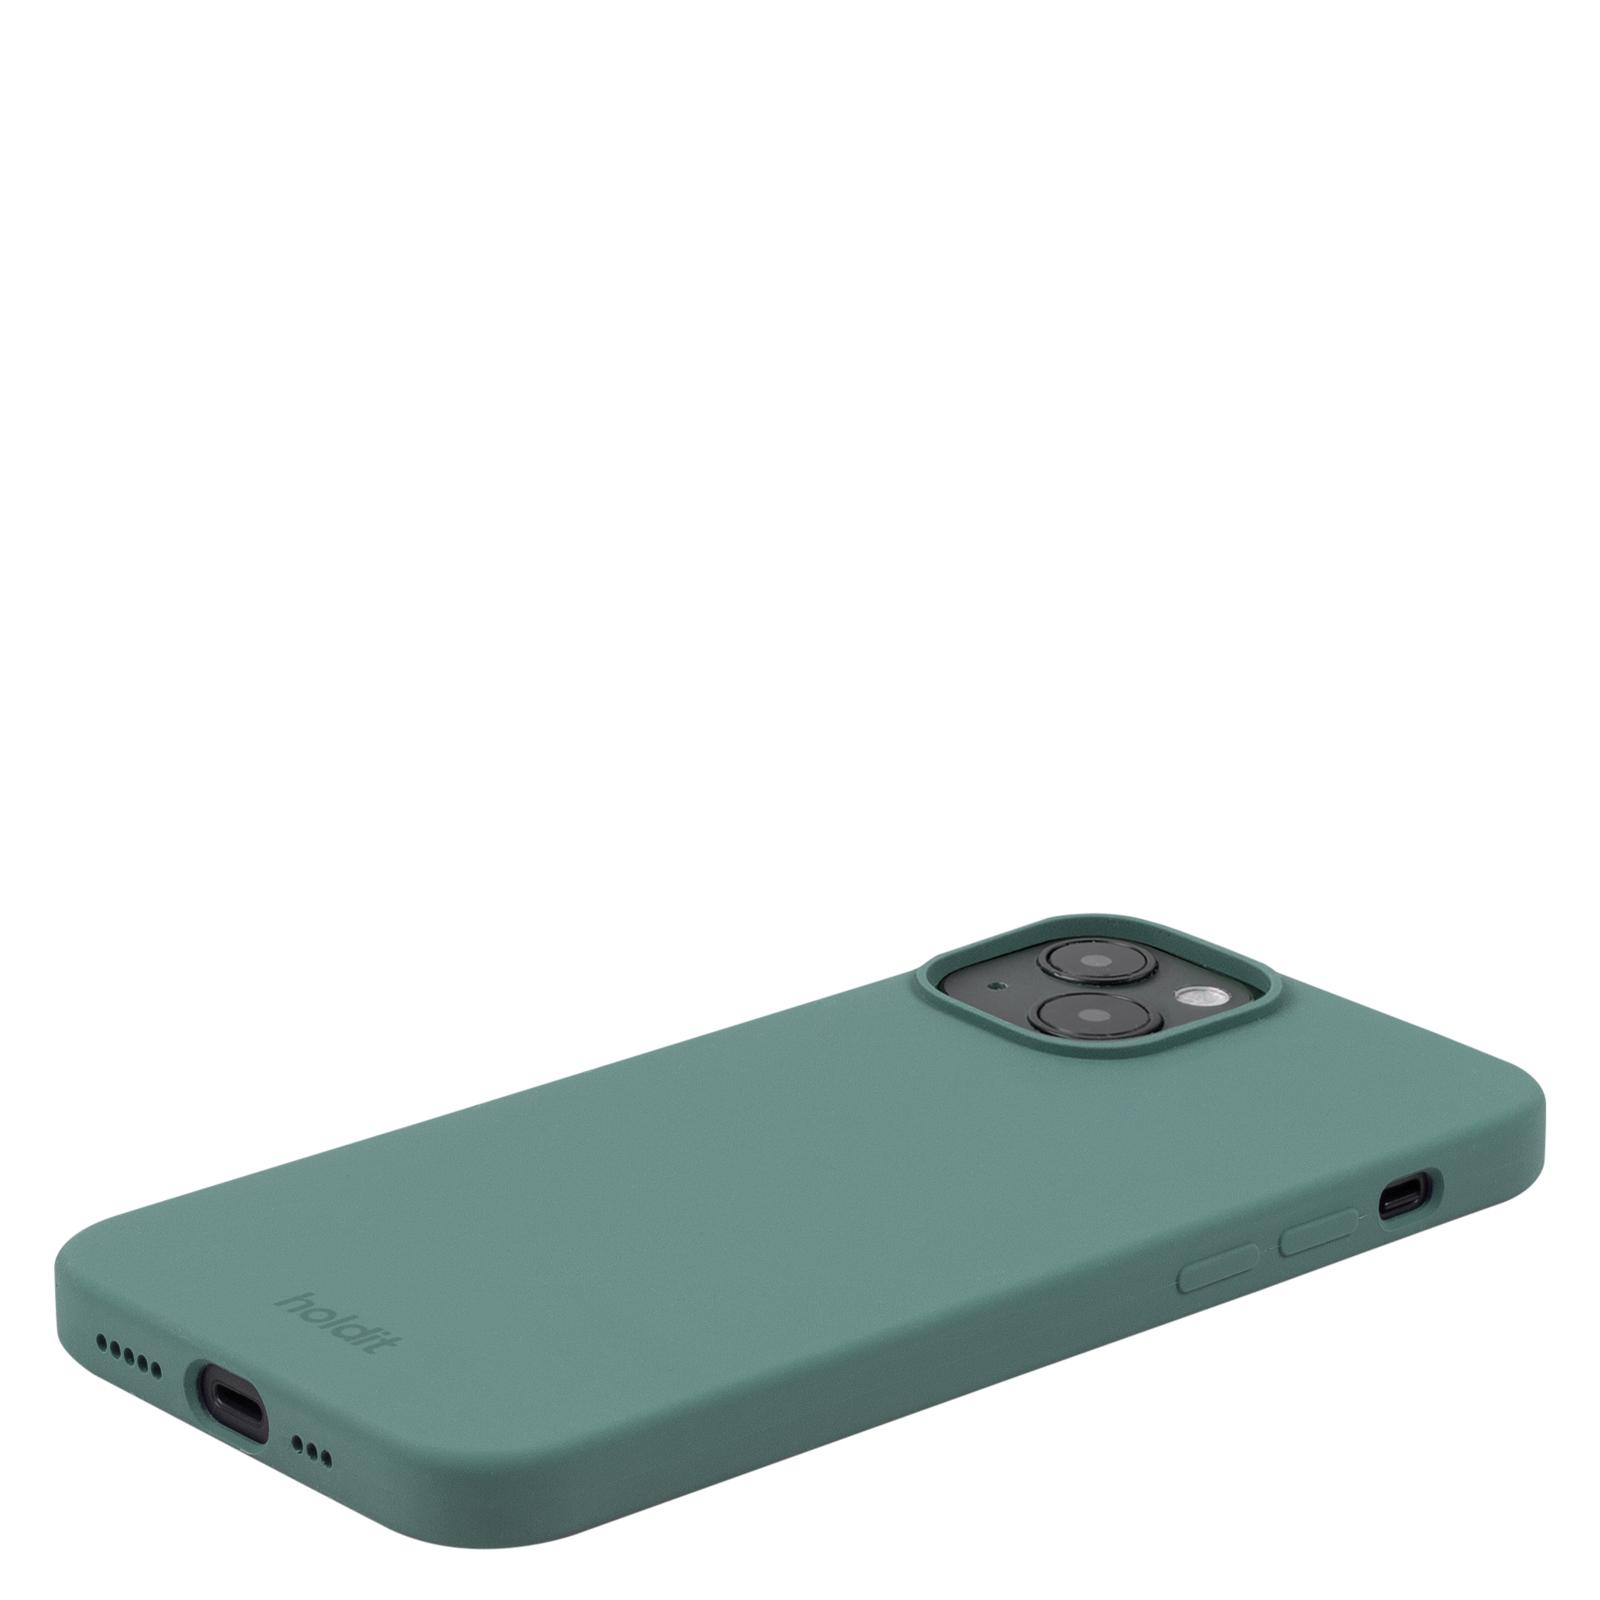 HOLDIT Silicone Case, Backcover, Apple, iPhone Green 14/13, Moss